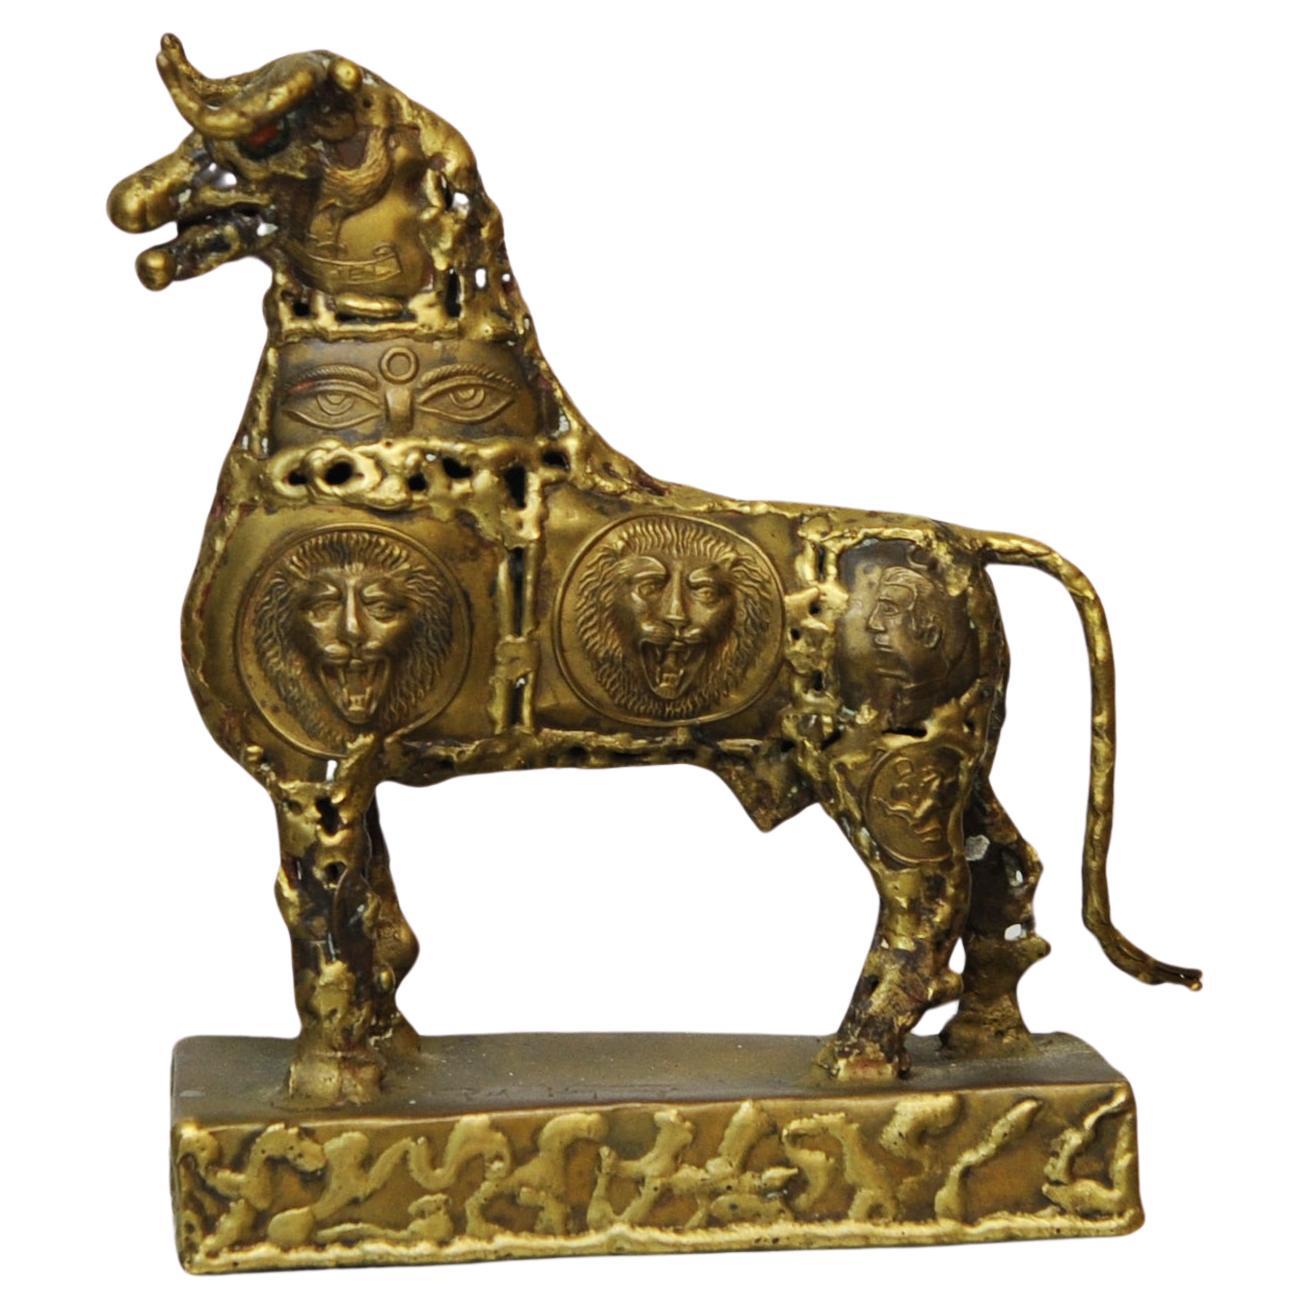 Brutalist Metal Sculpture of a Brass Bull by Pal Kepenyes, 1970s For Sale